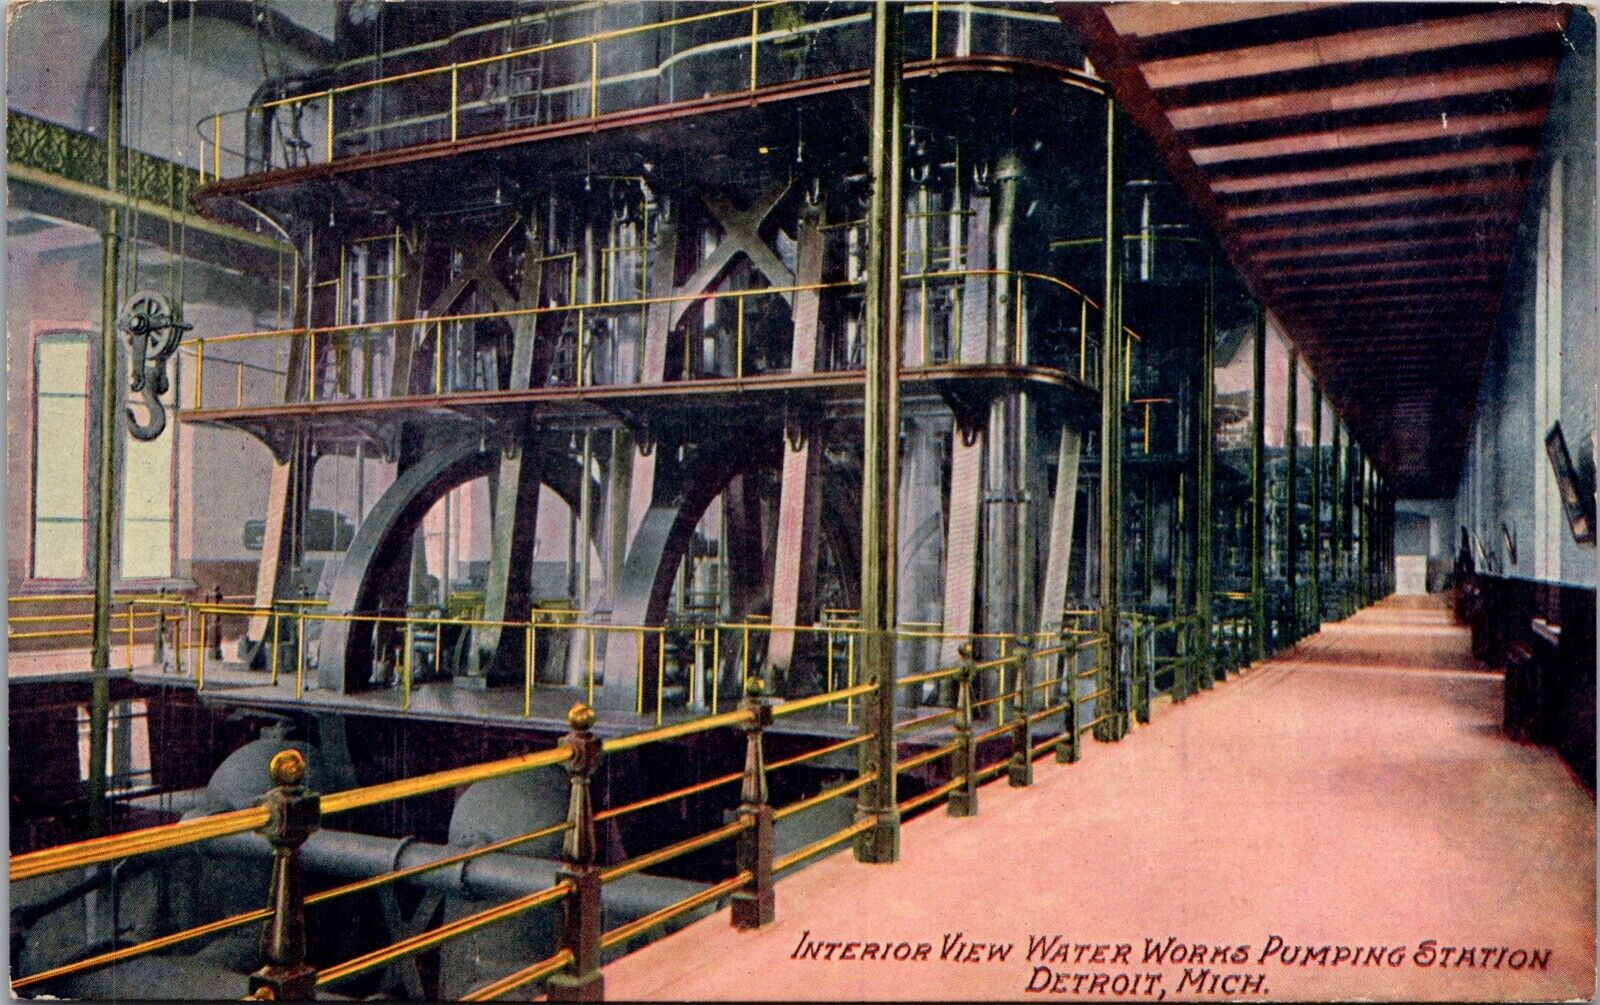 Postcard Interior View Water Works Pumping Station in Detroit, Michigan